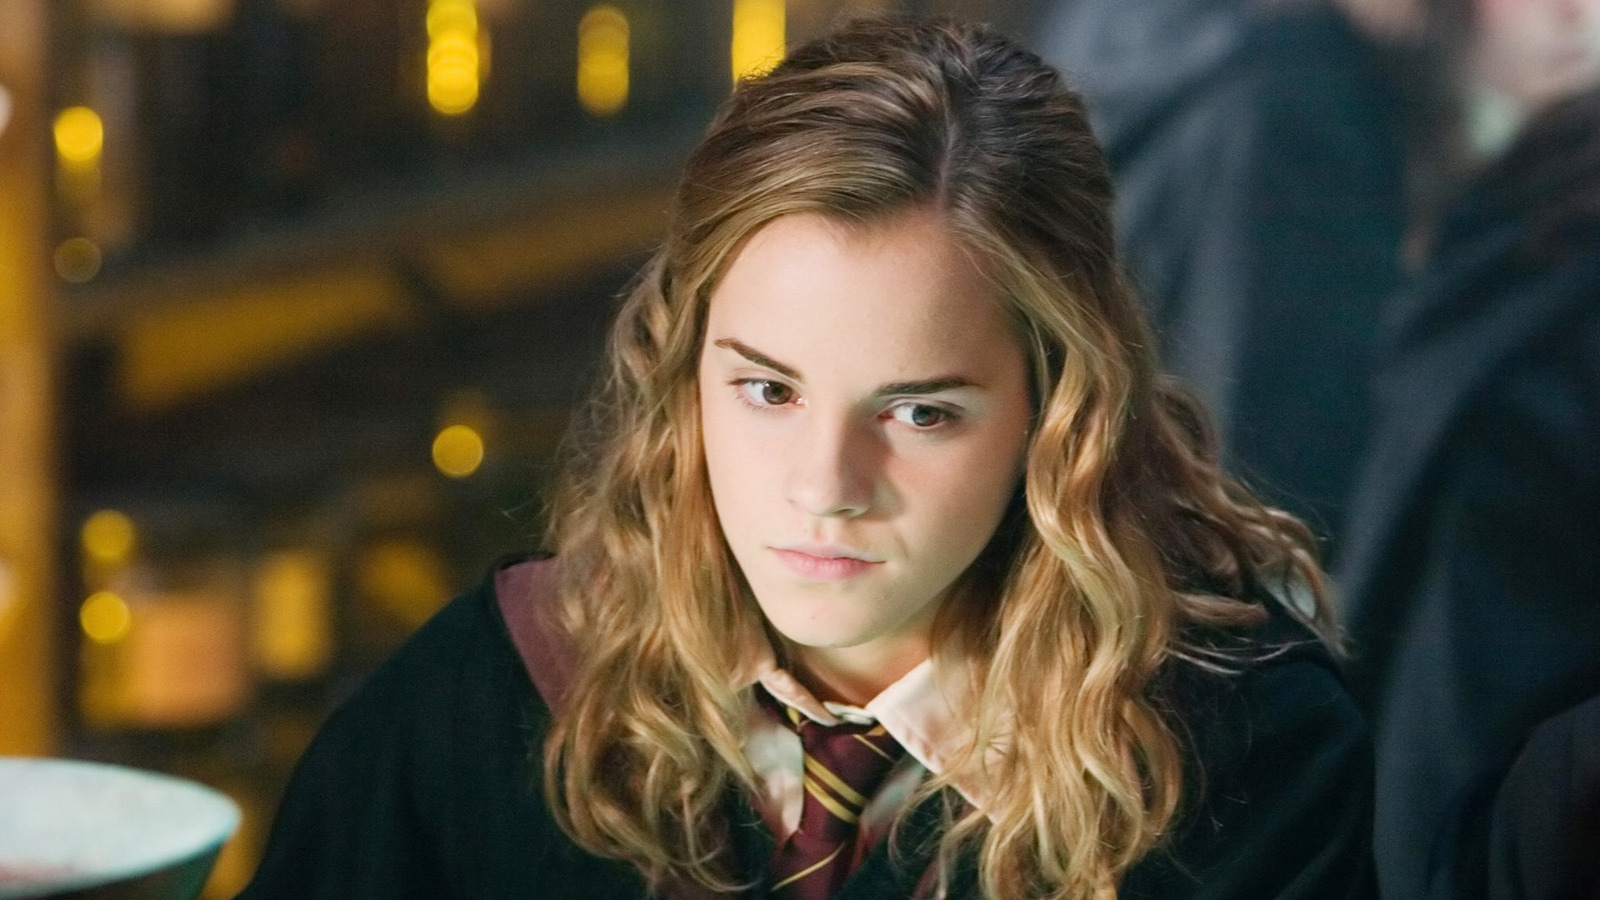 https://www.looper.com/img/gallery/the-savage-hermione-moments-that-make-harry-potter-fans-love-her-more/l-intro-1609791612.jpg